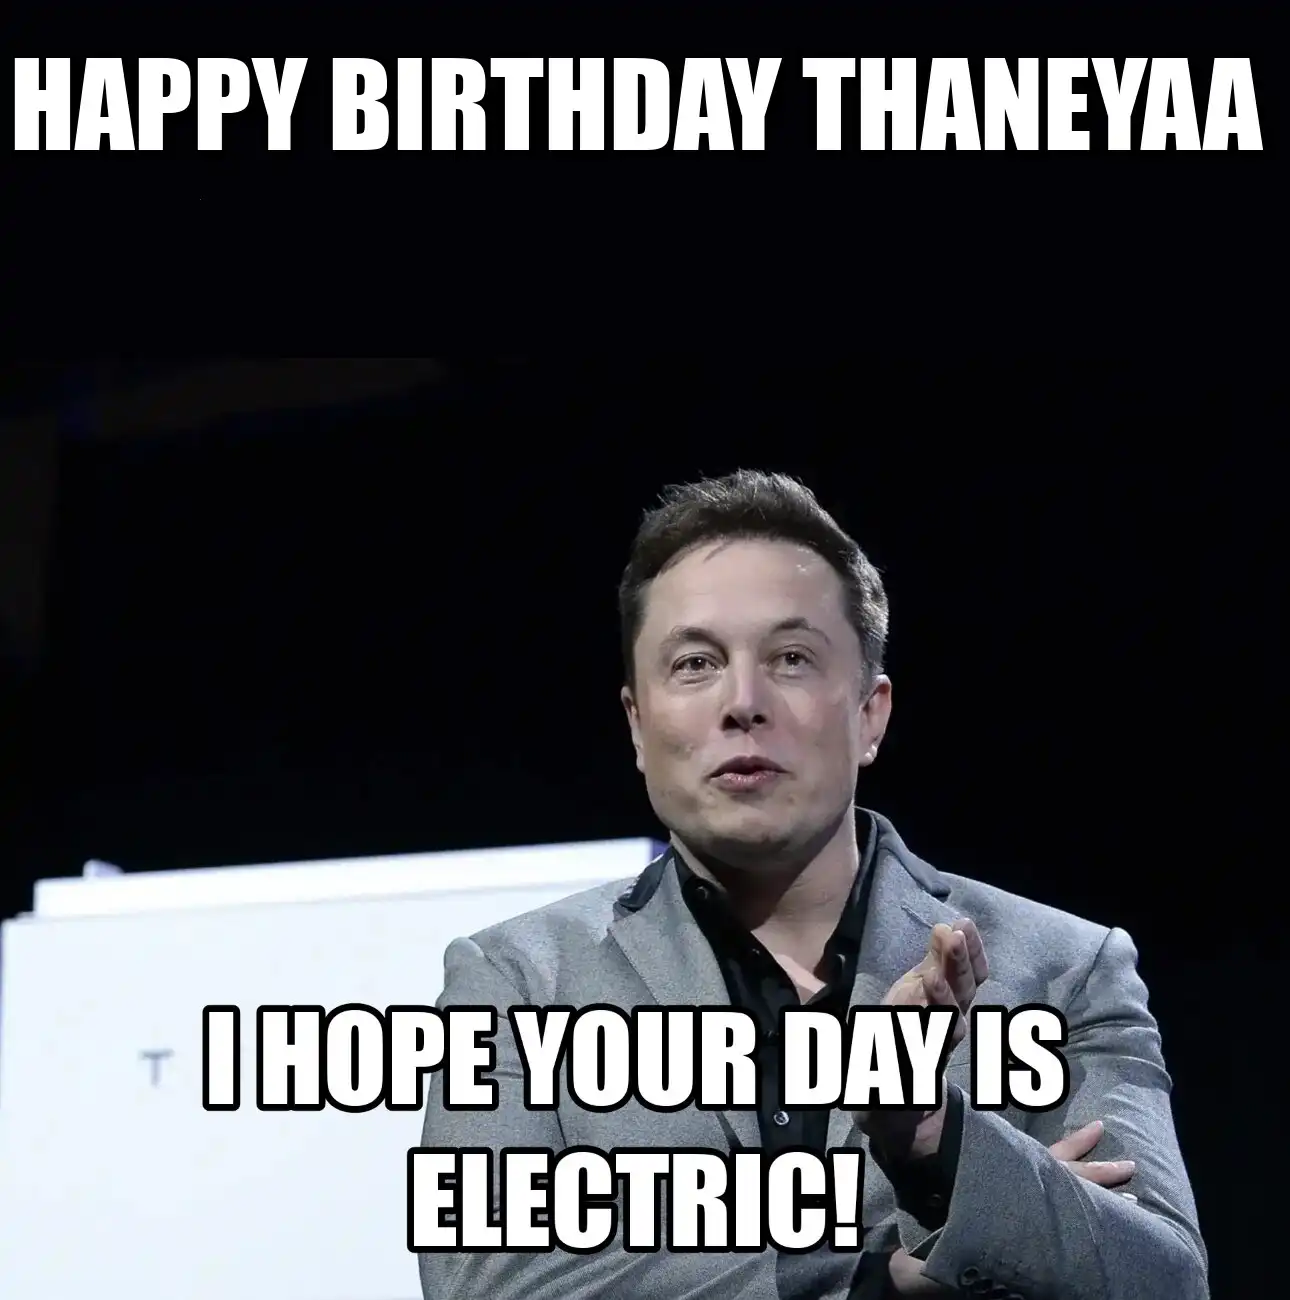 Happy Birthday Thaneyaa I Hope Your Day Is Electric Meme